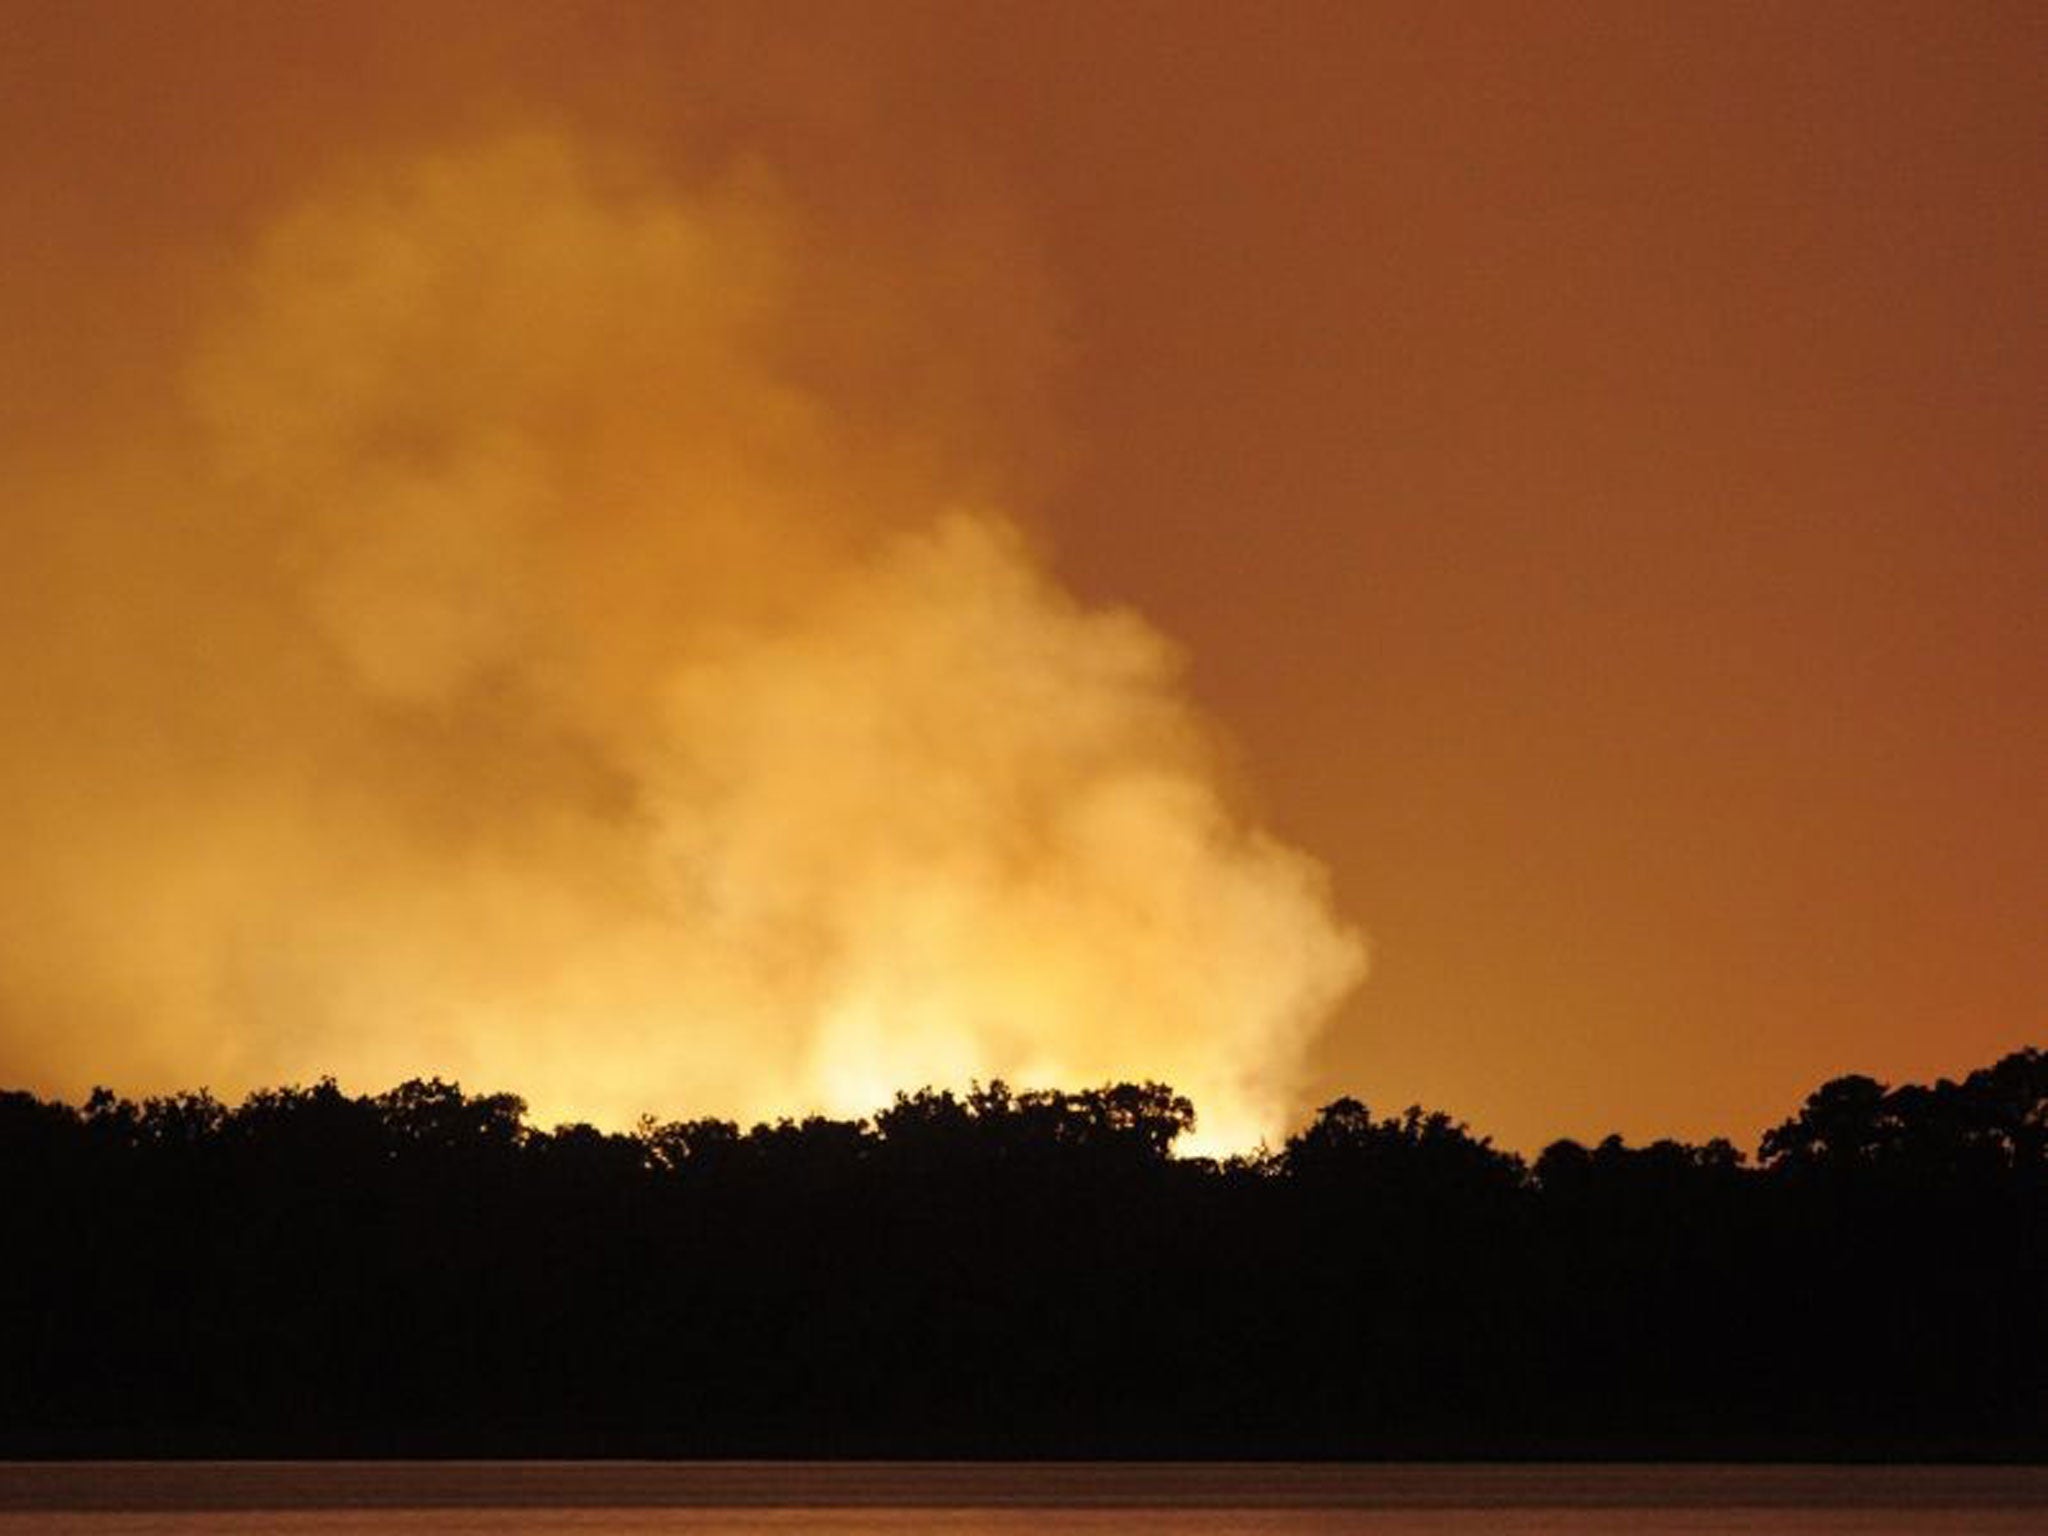 Fire blazing above the marshy Florida tree-line after series of explosions at a gas plant